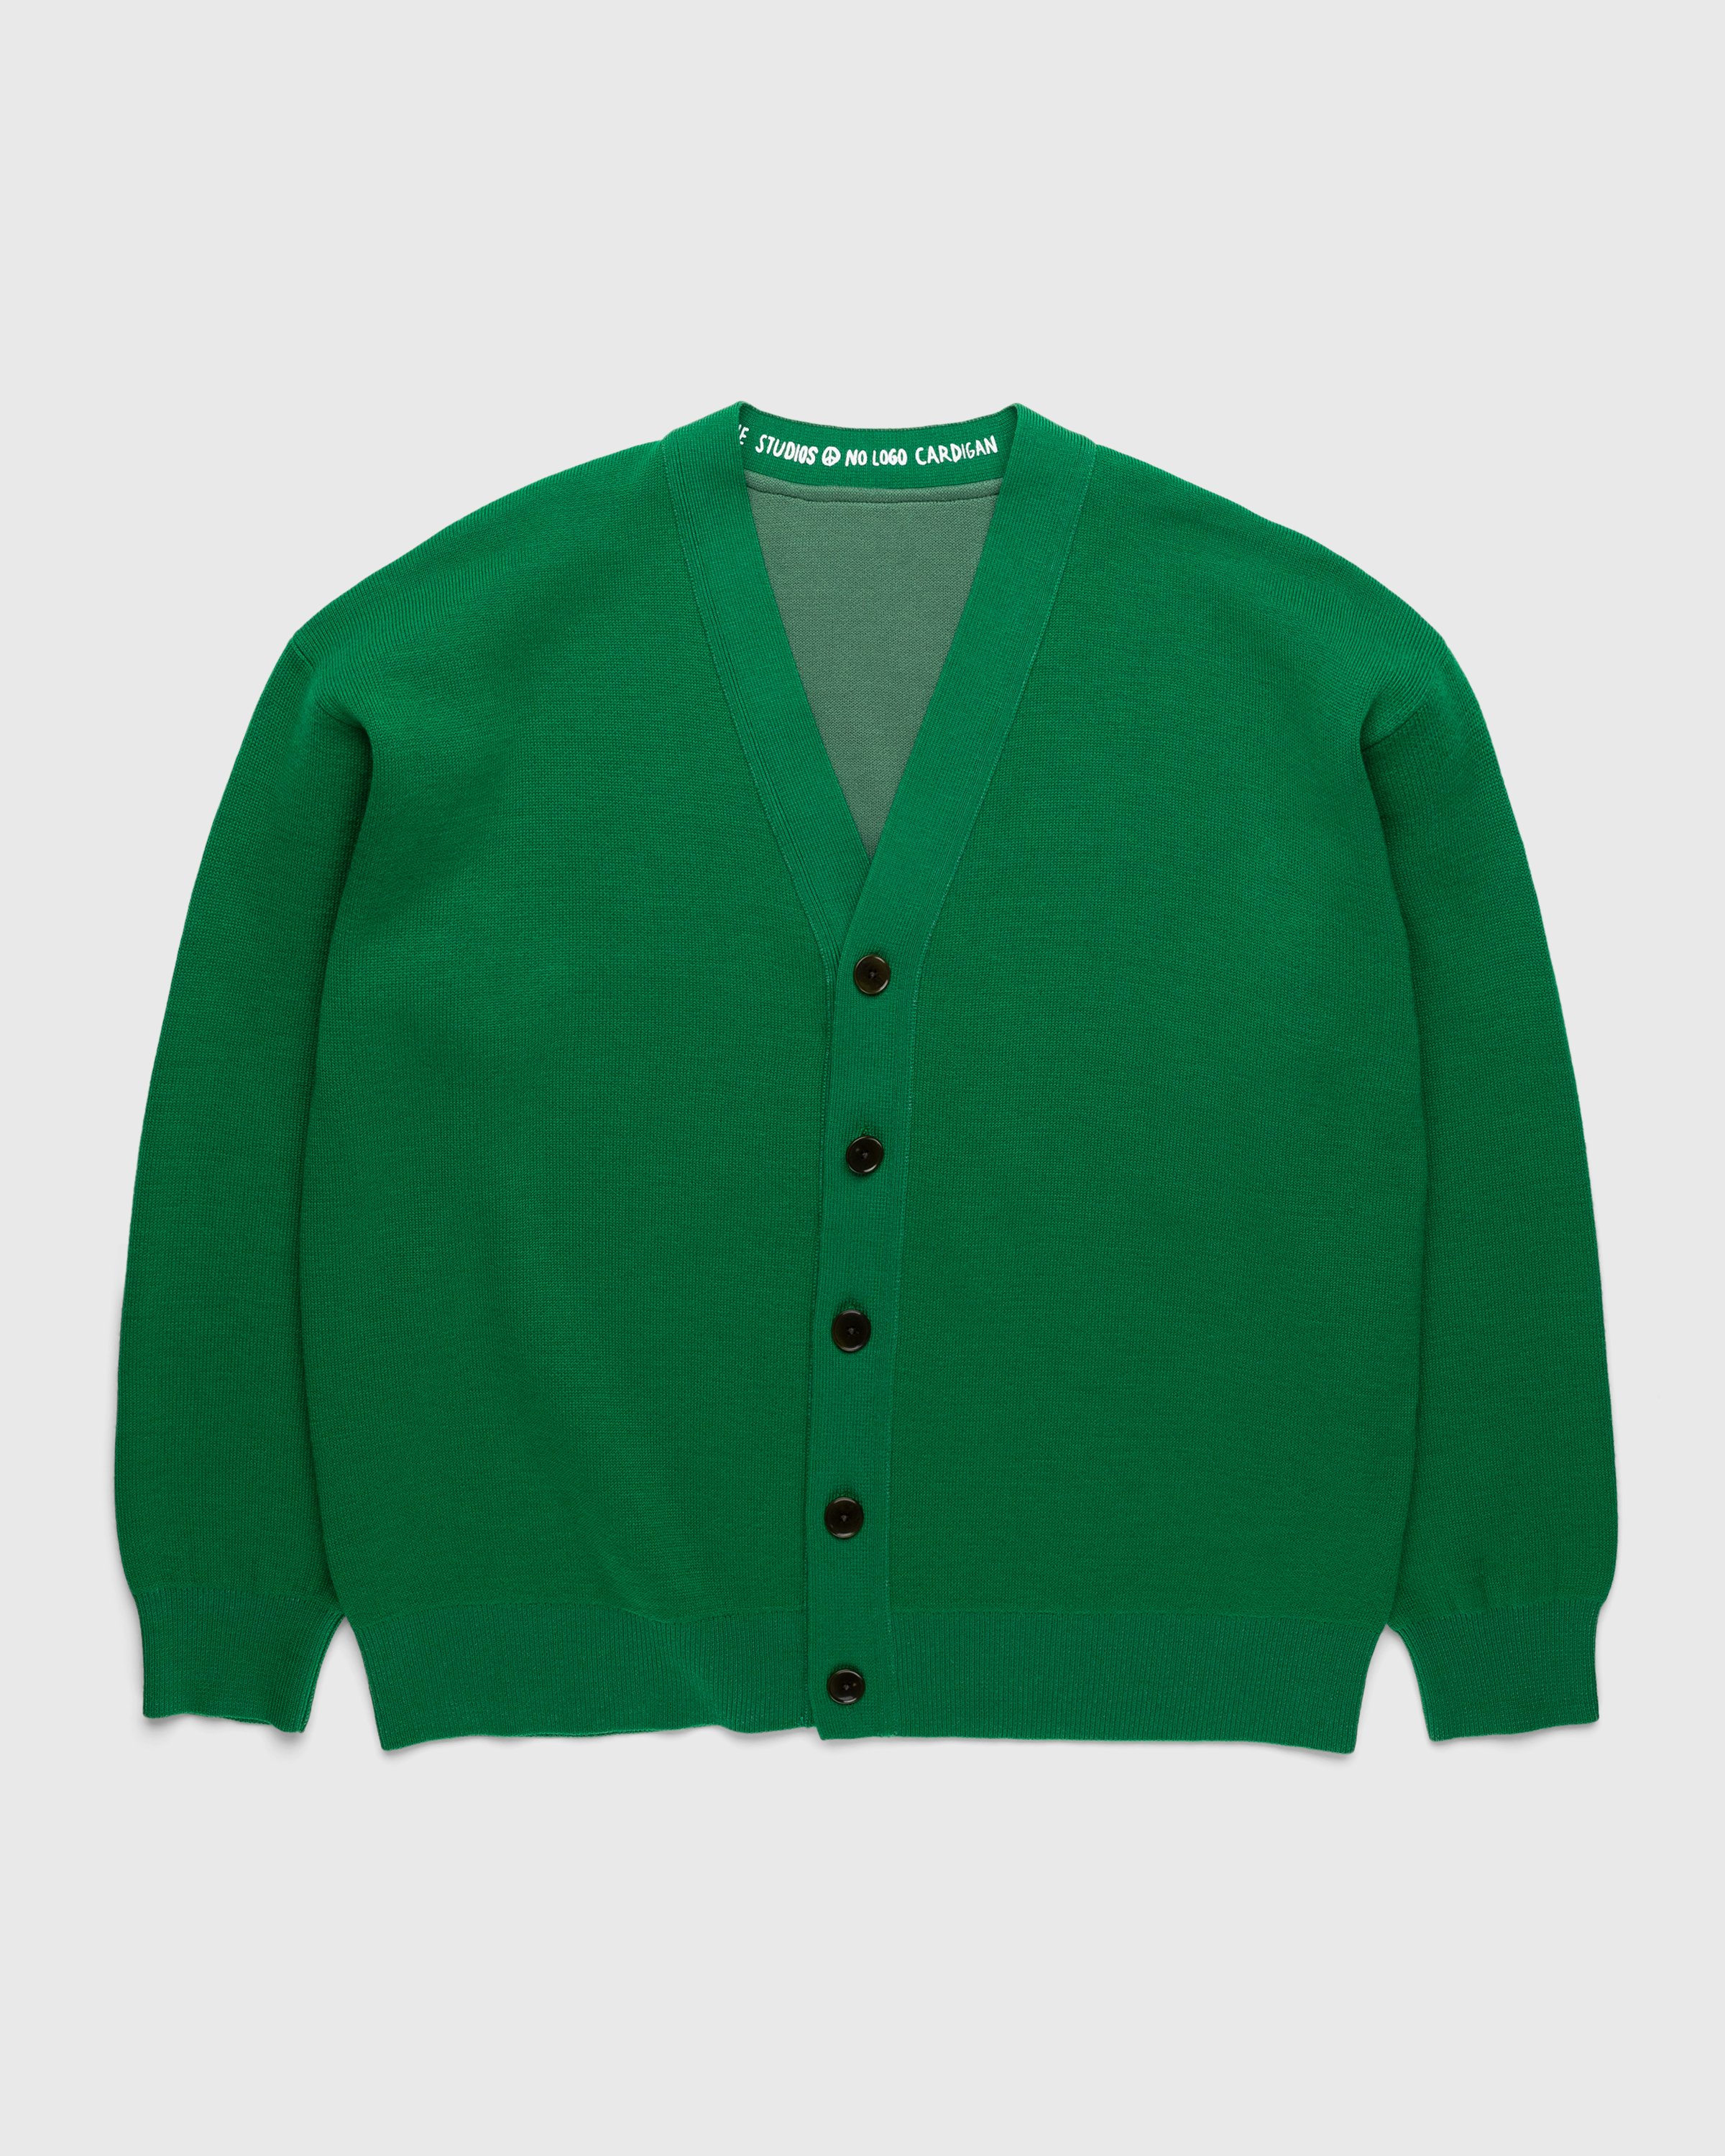 Acne Studios - Wool Blend V-Neck Cardigan Sweater Electric Green - Clothing - Green - Image 1